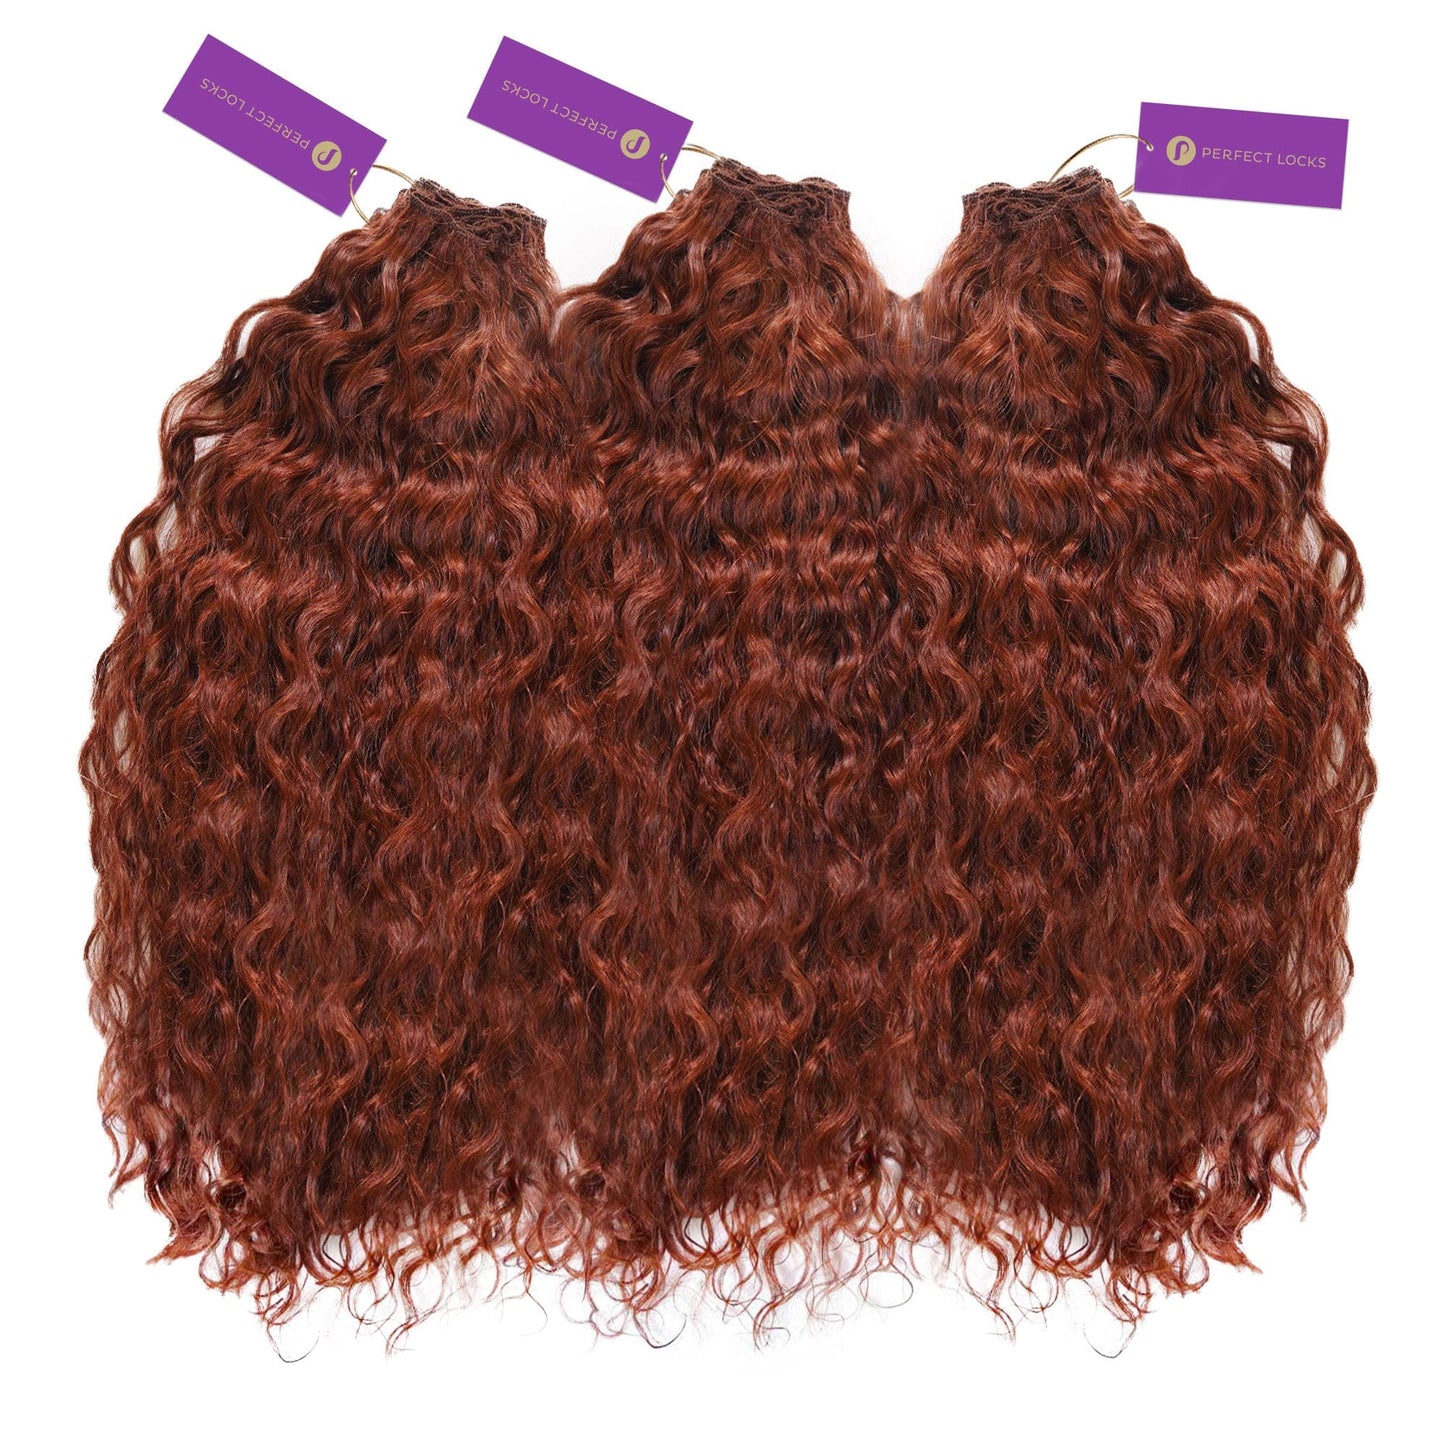 3 x Curly Hand-Tied Rows Bundle Deal